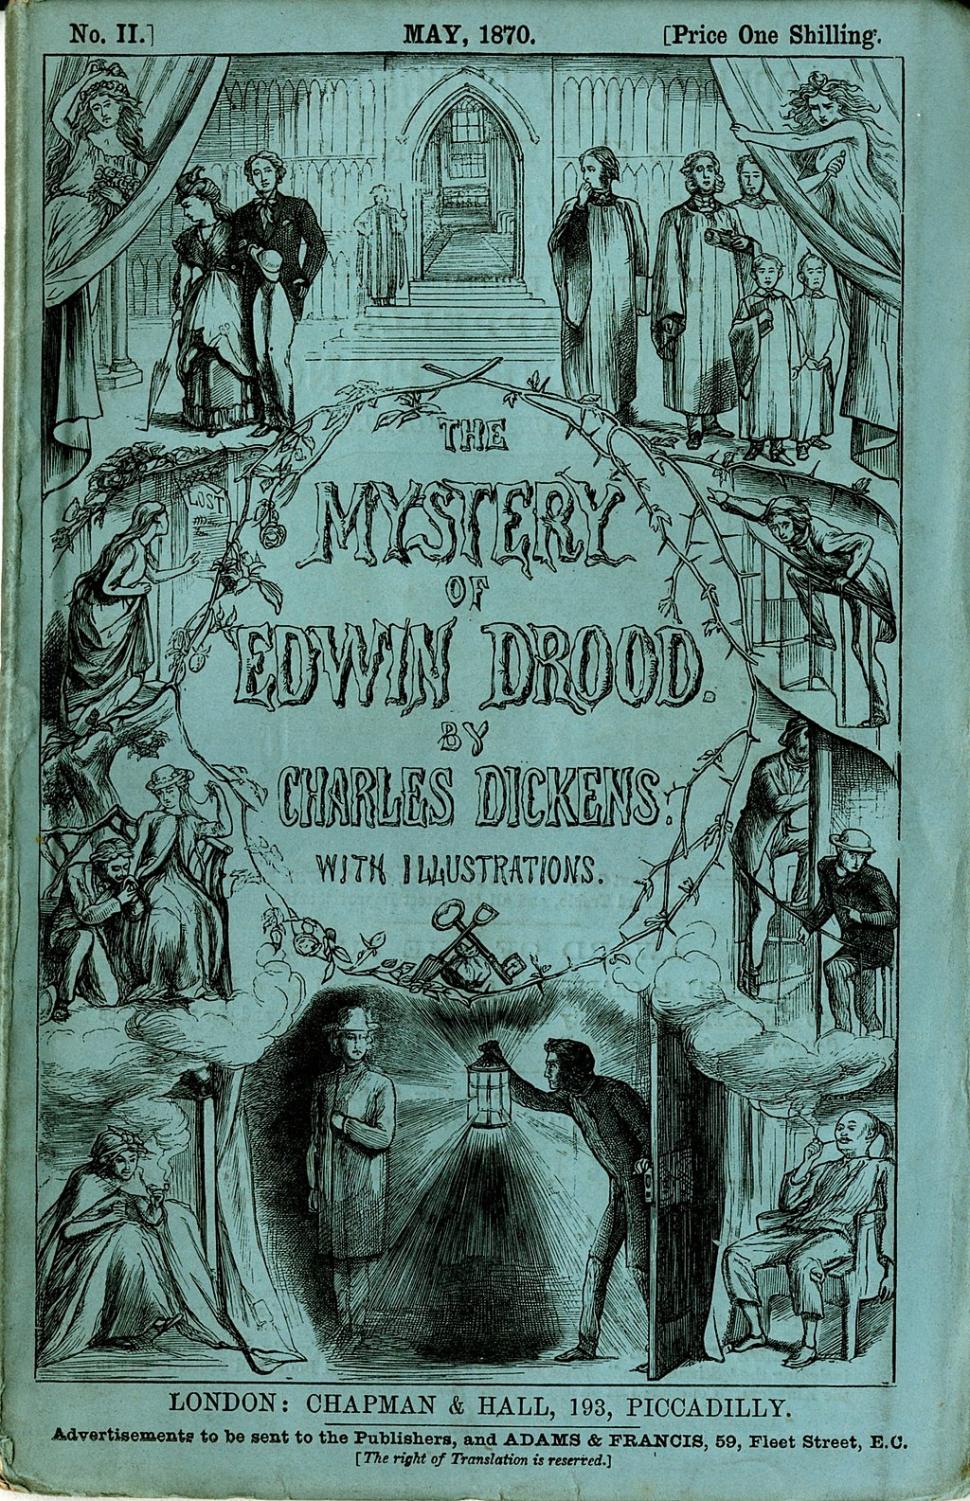 Original cover to Dickens unfinished story